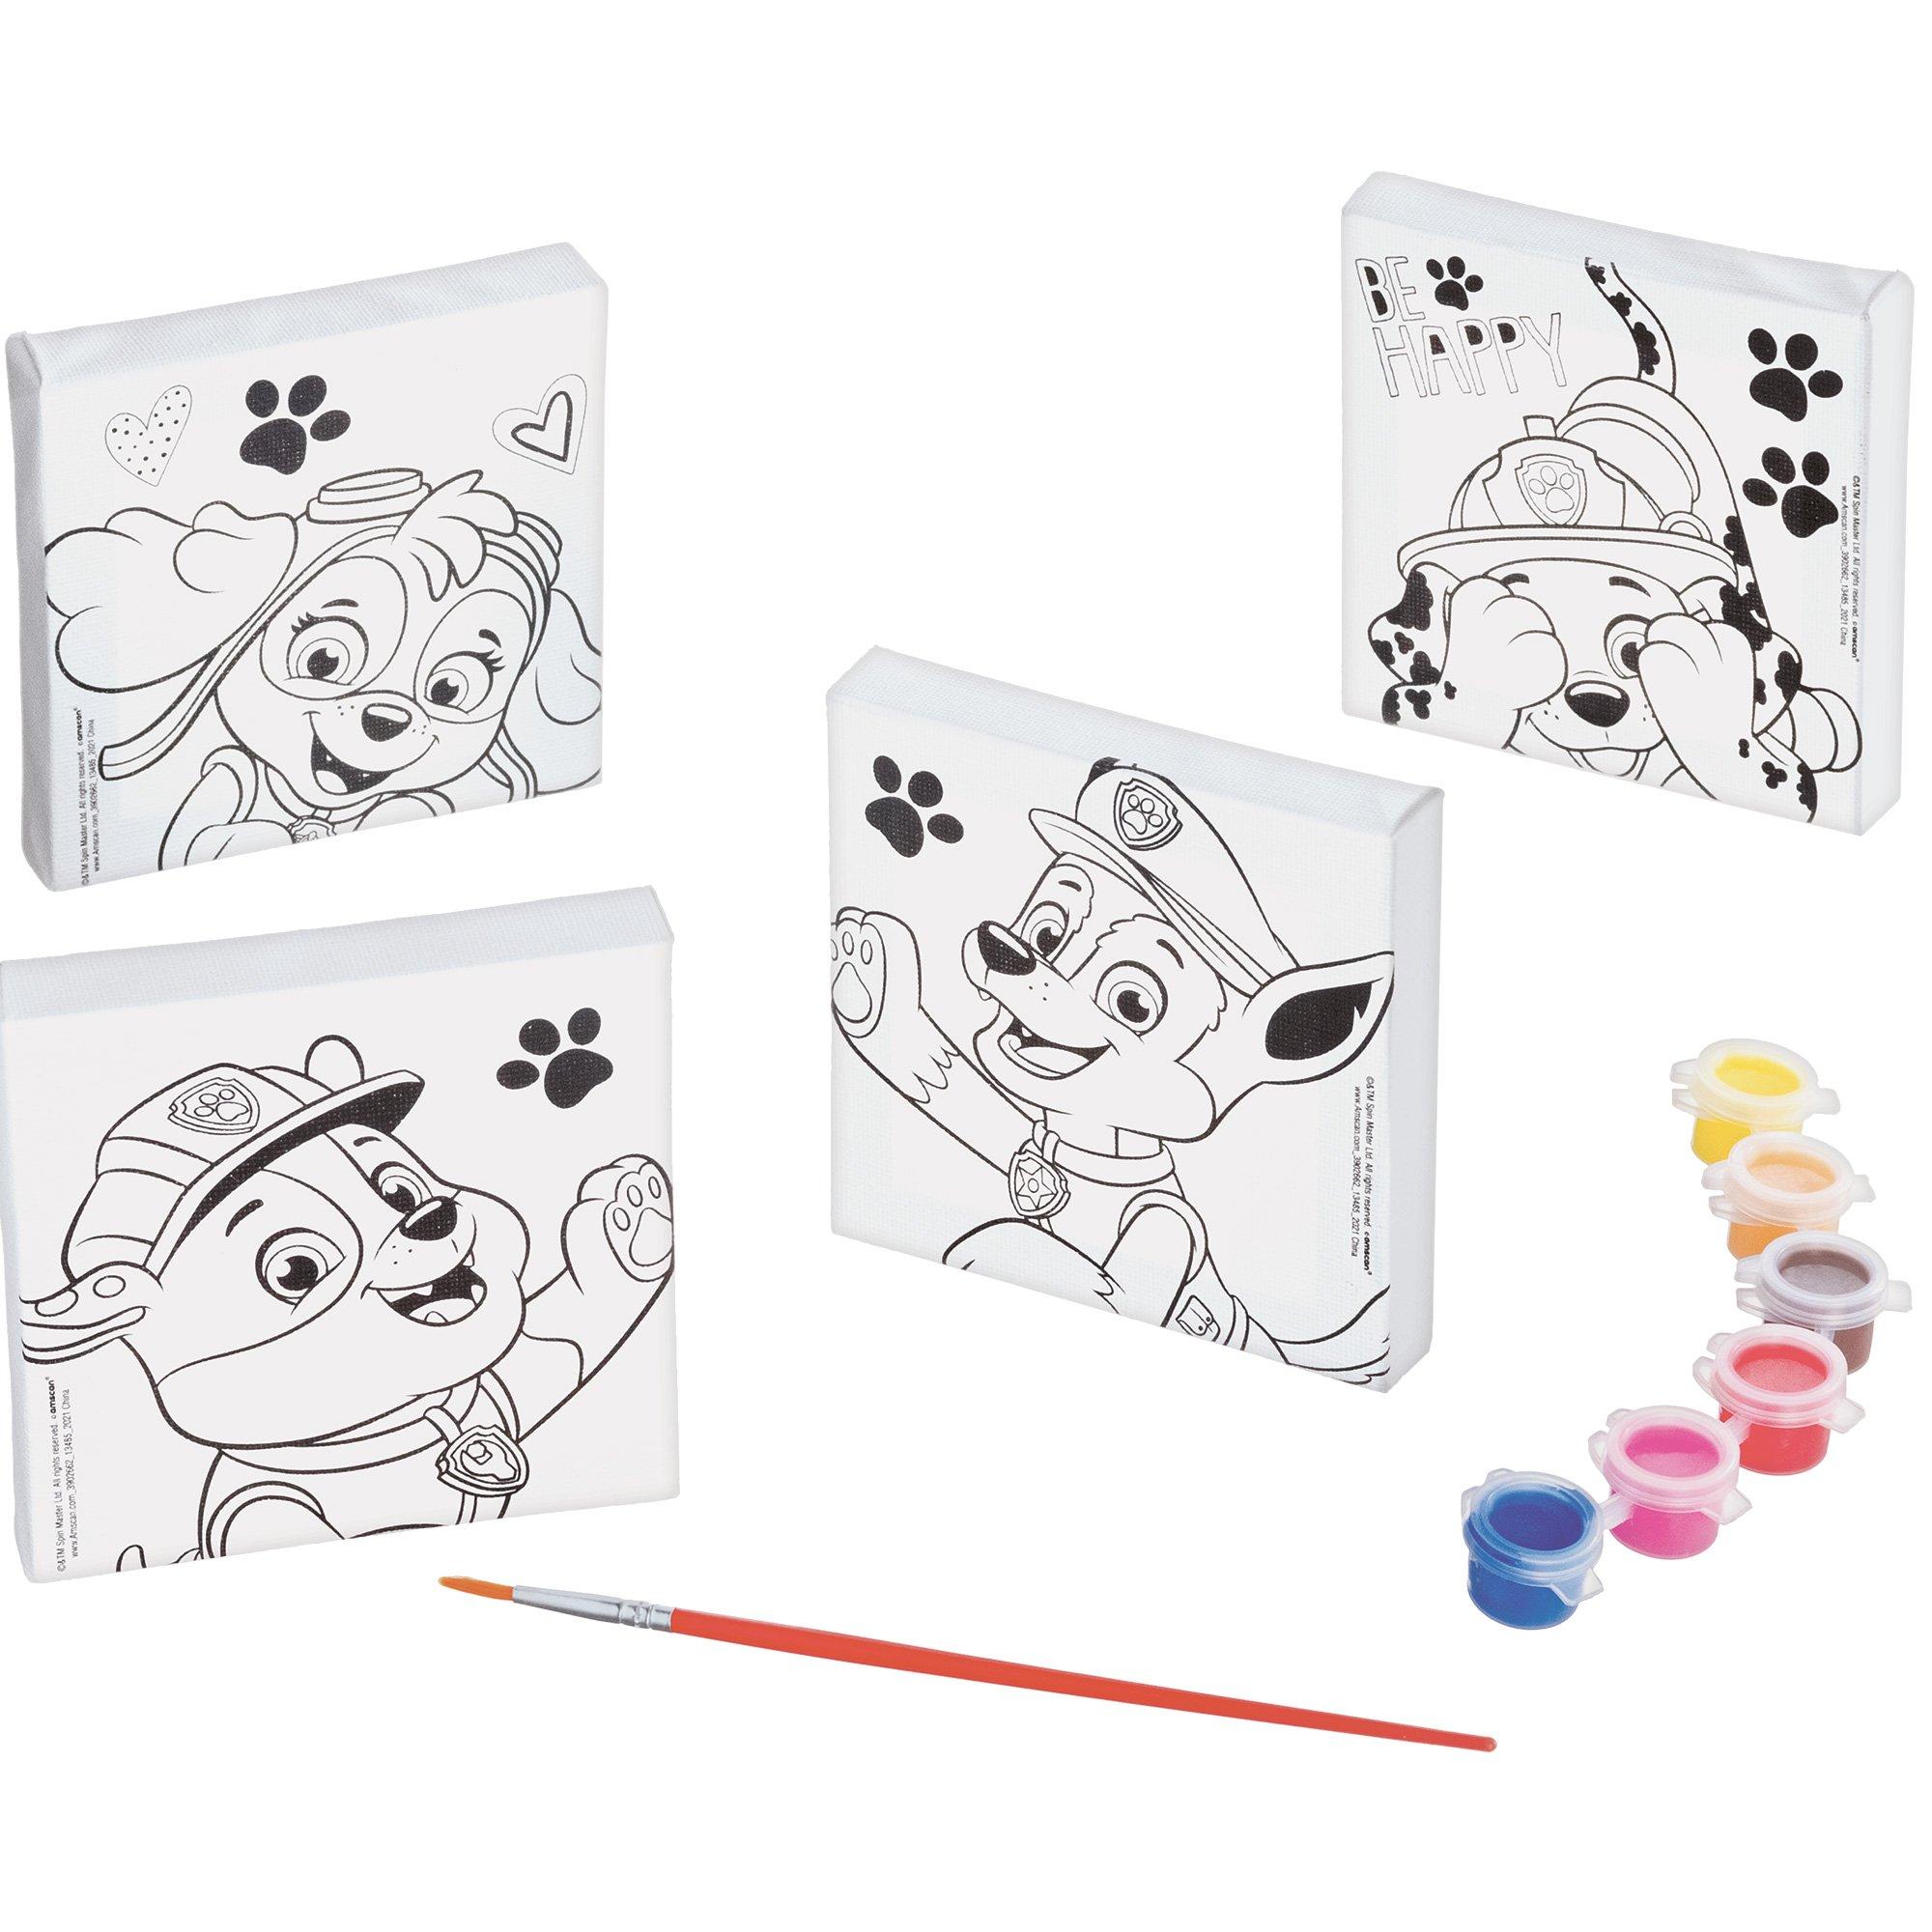 Disney Princess Color Your Own Canvas Kit, 4pc Birthday Party Supplies